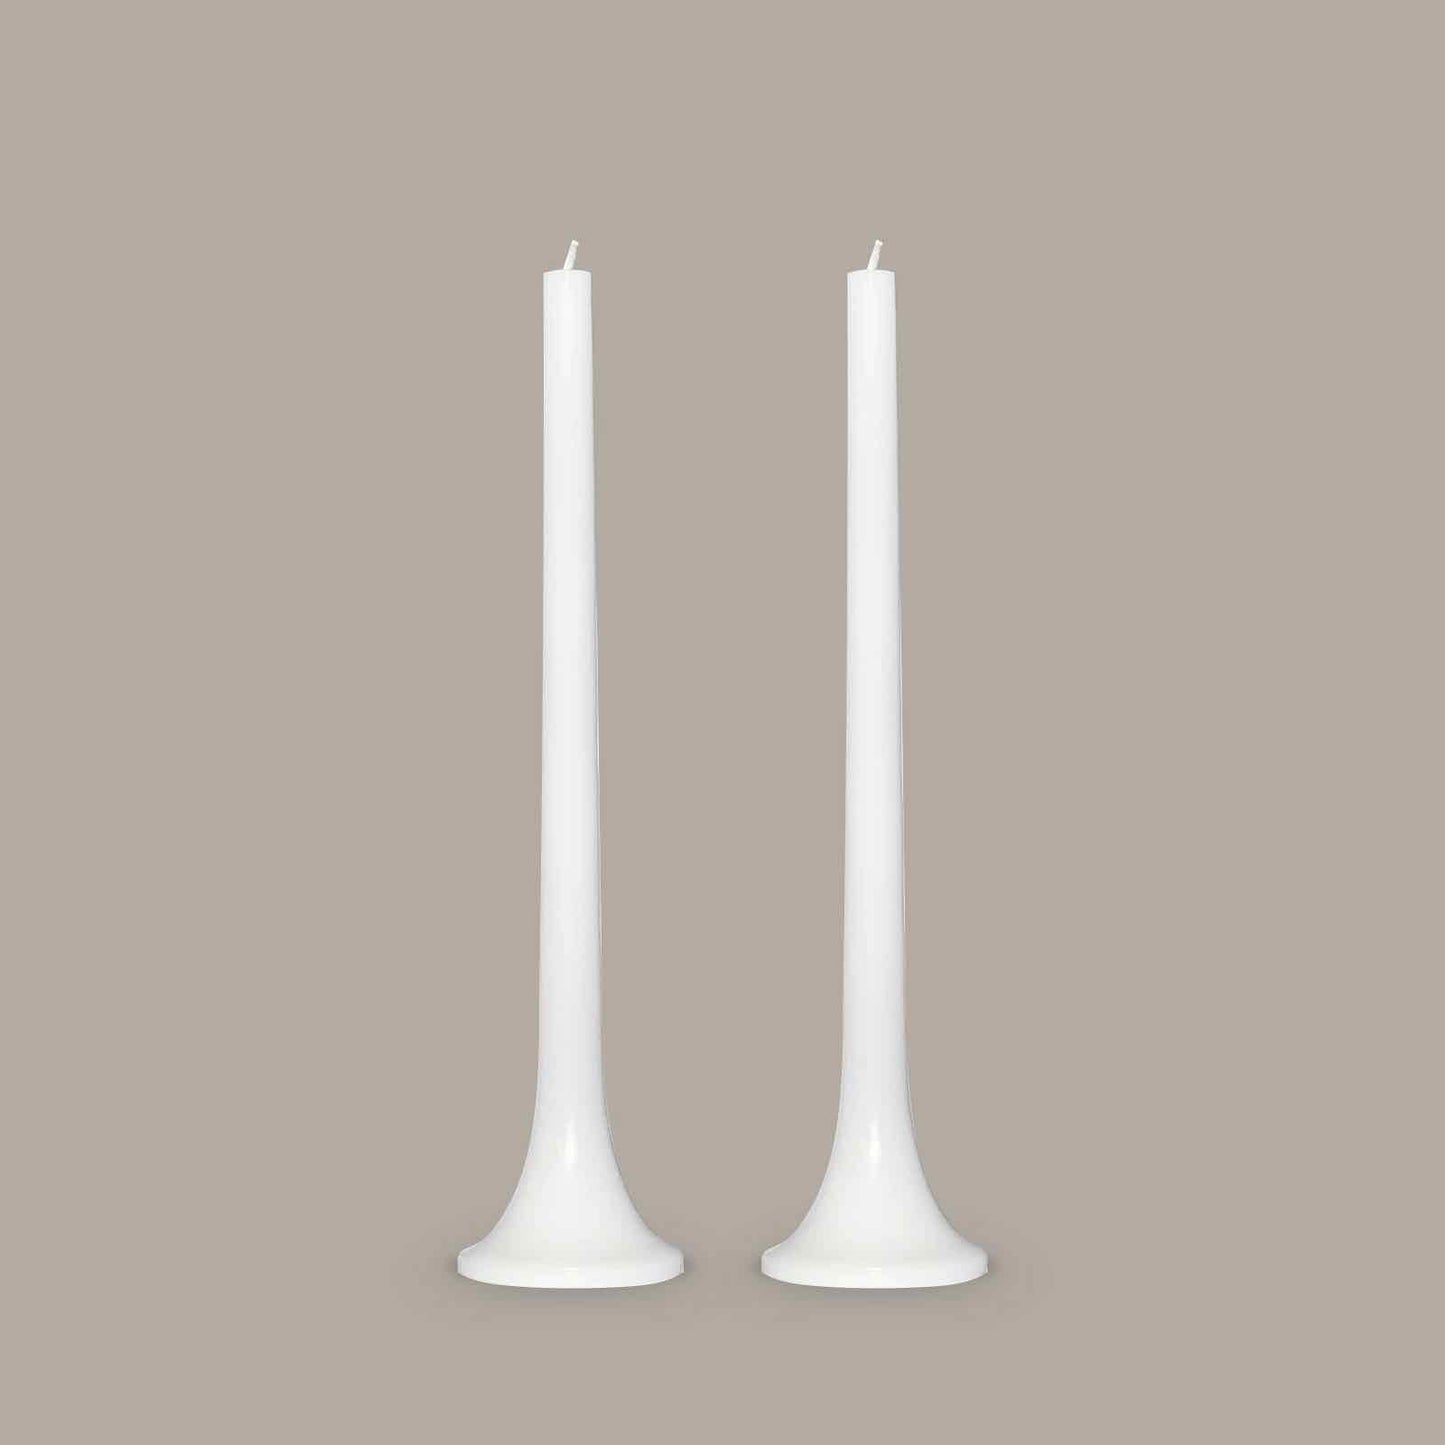 Modern white taper candles